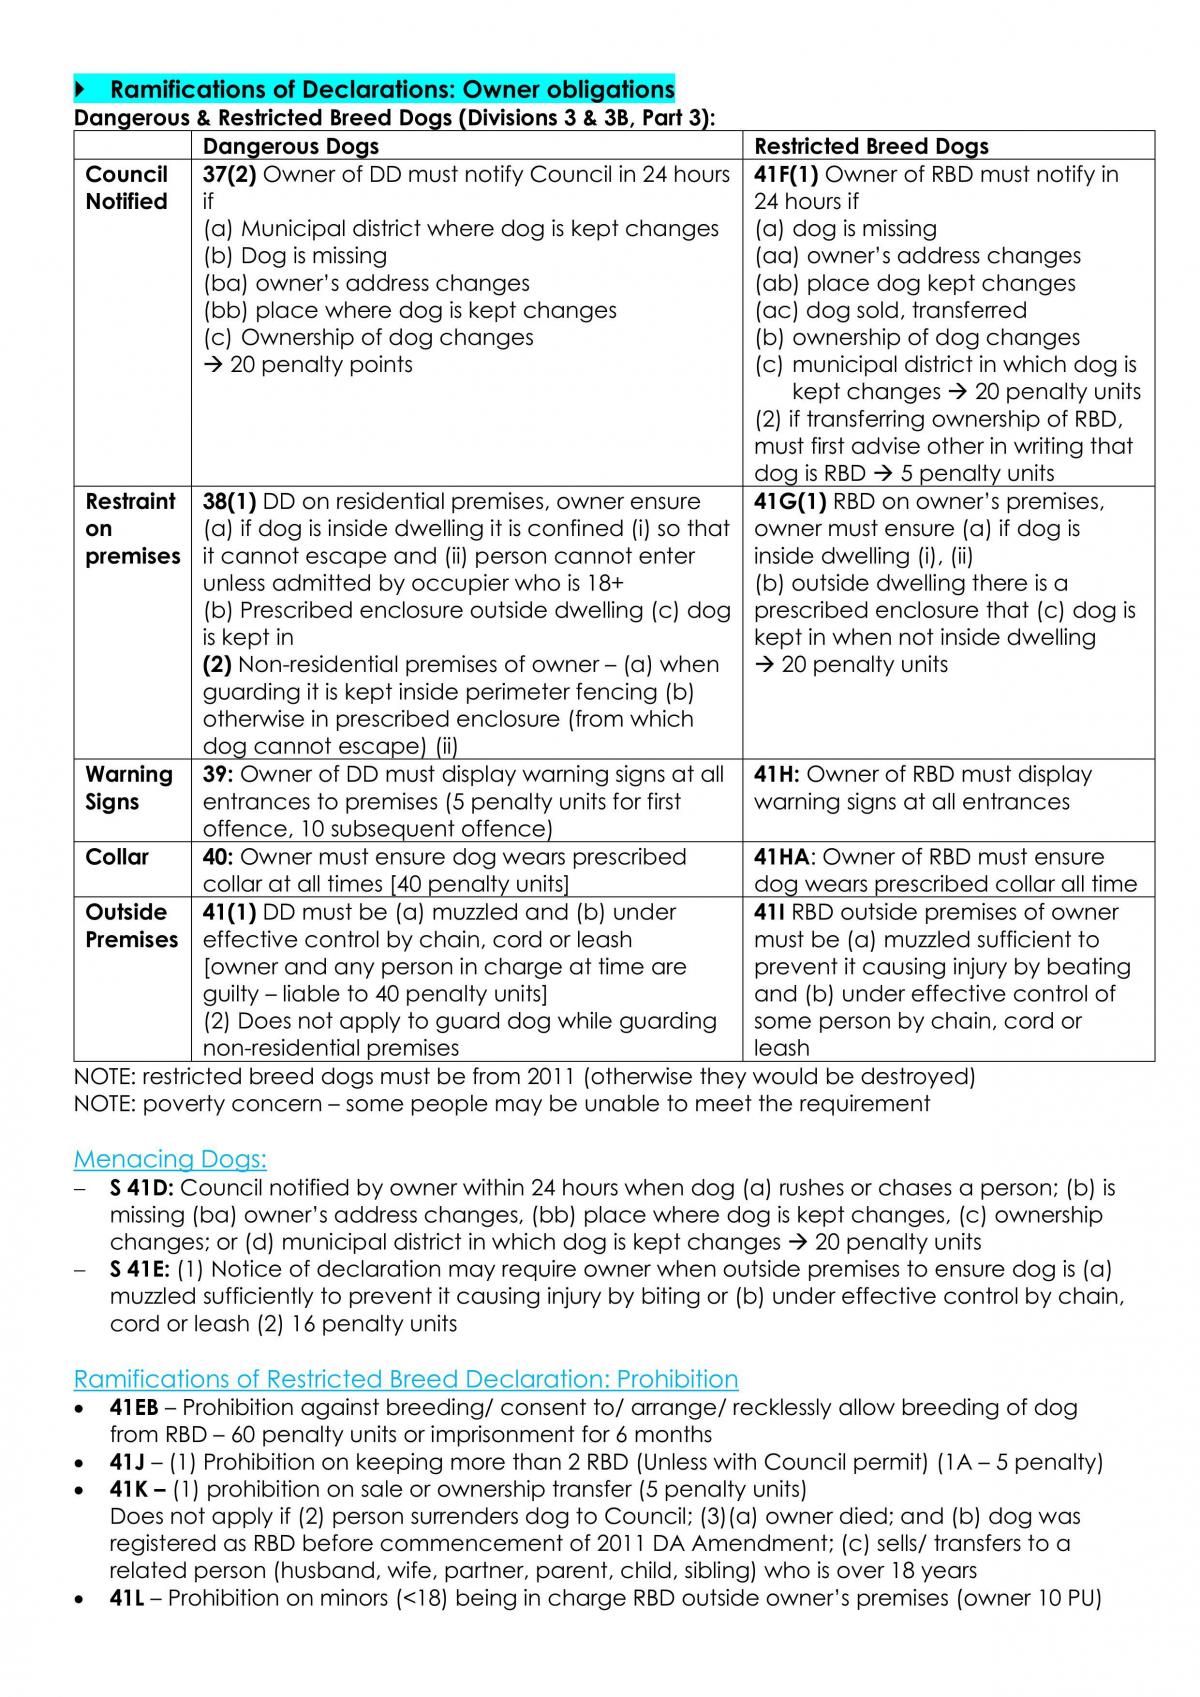 HD 84 LAW4230 Comprehensive Study/ Exam Notes - Page 37